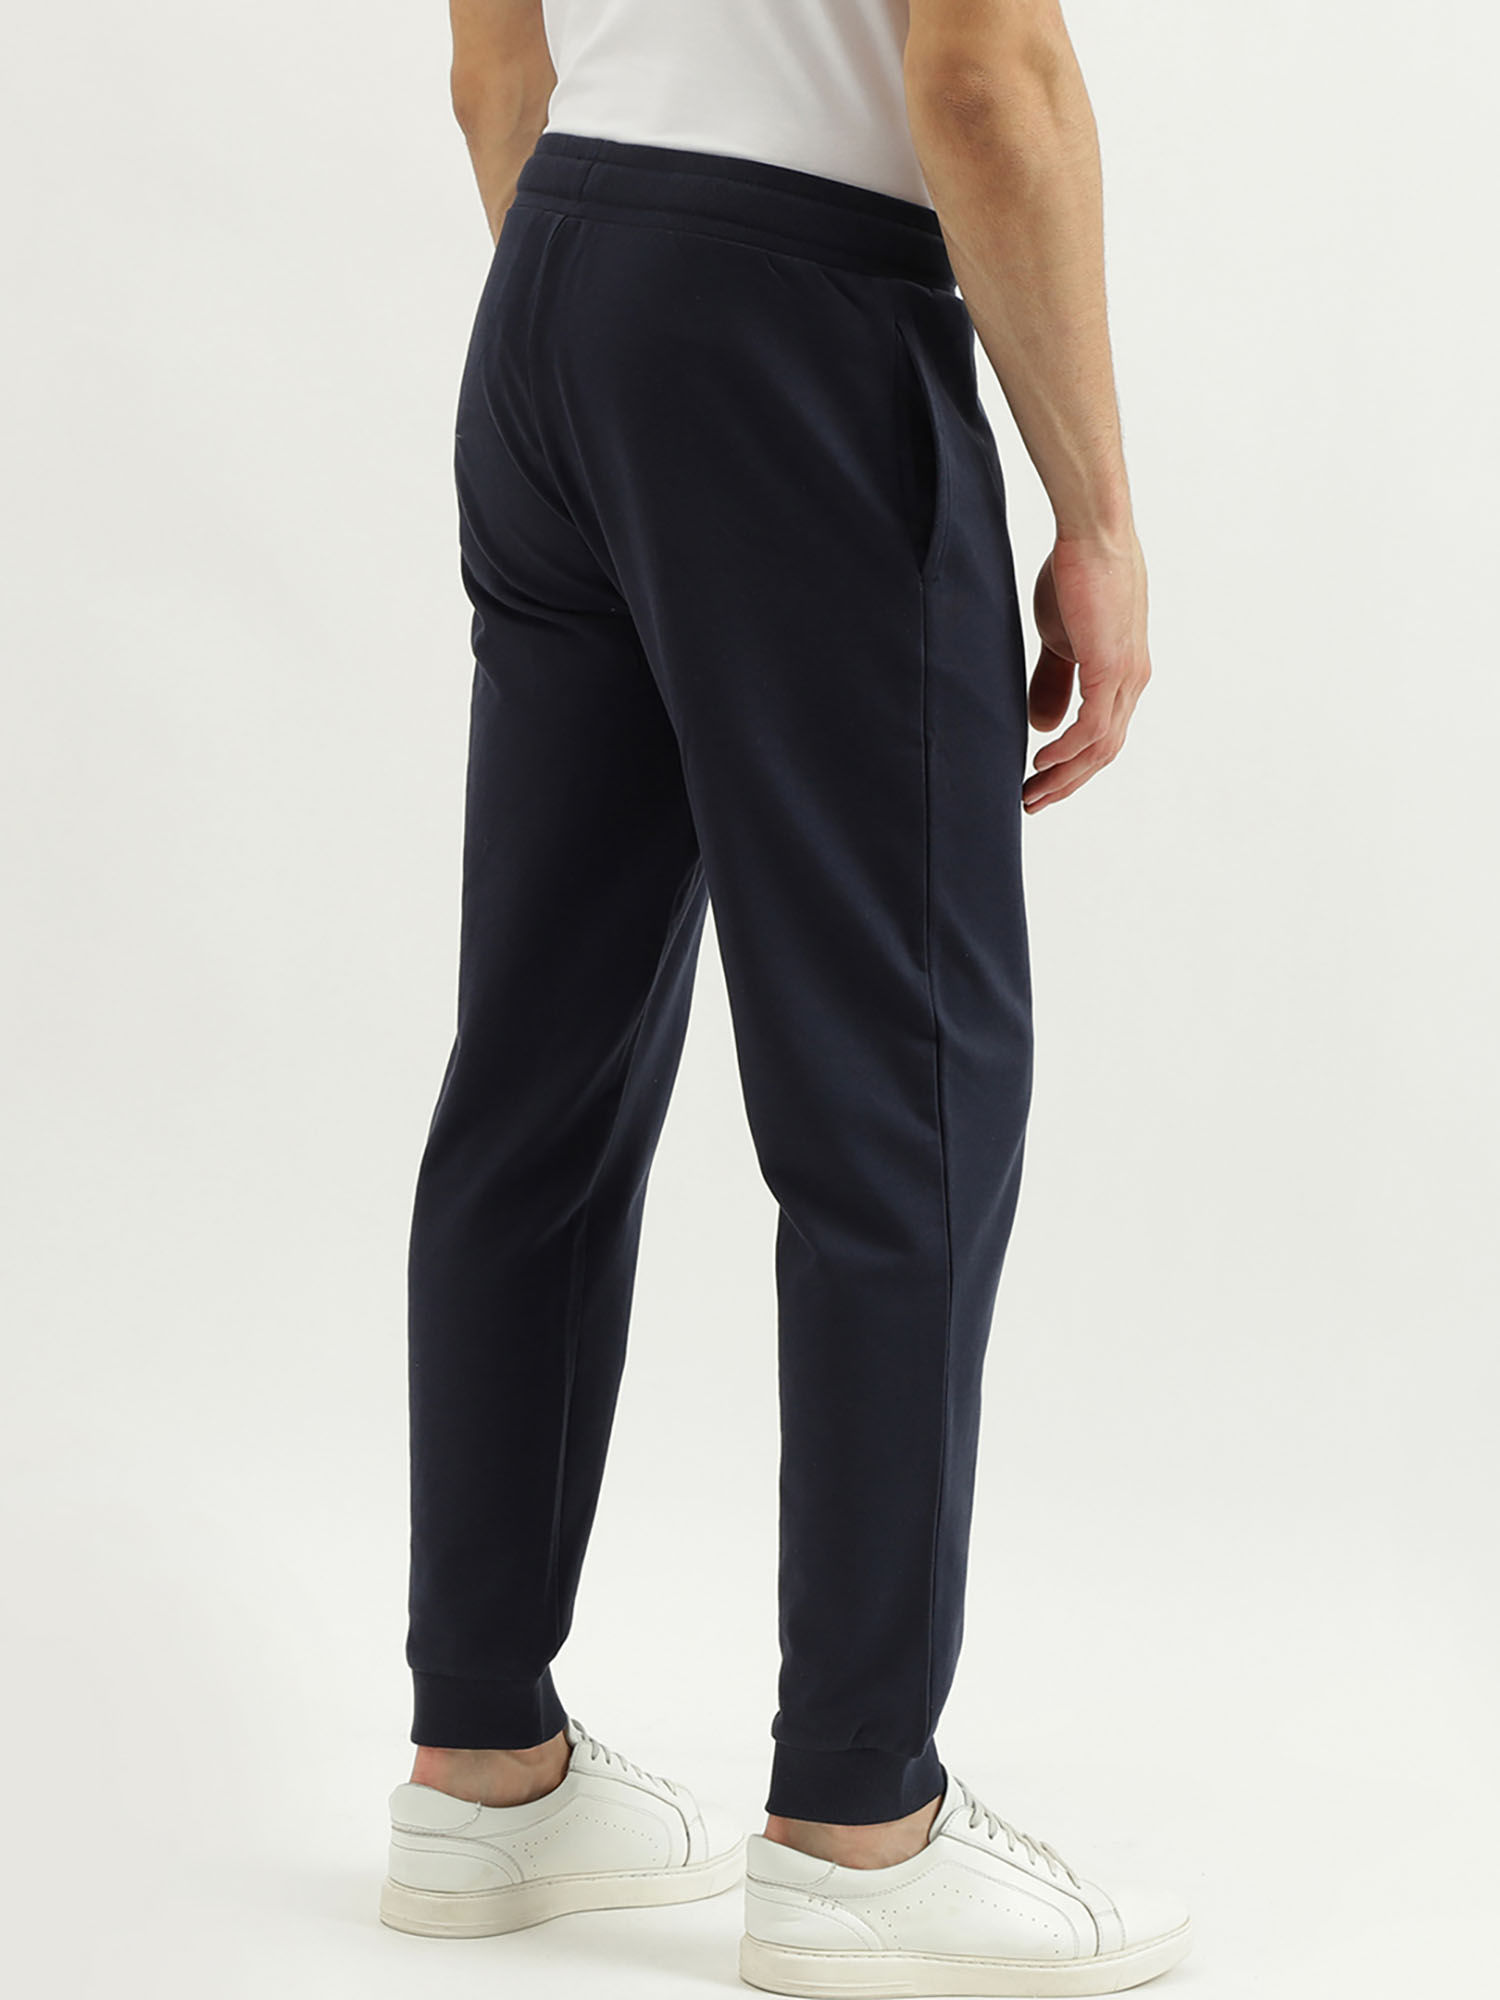 Buy United Colors of Benetton Mens Slim Fit Solid Trousers online